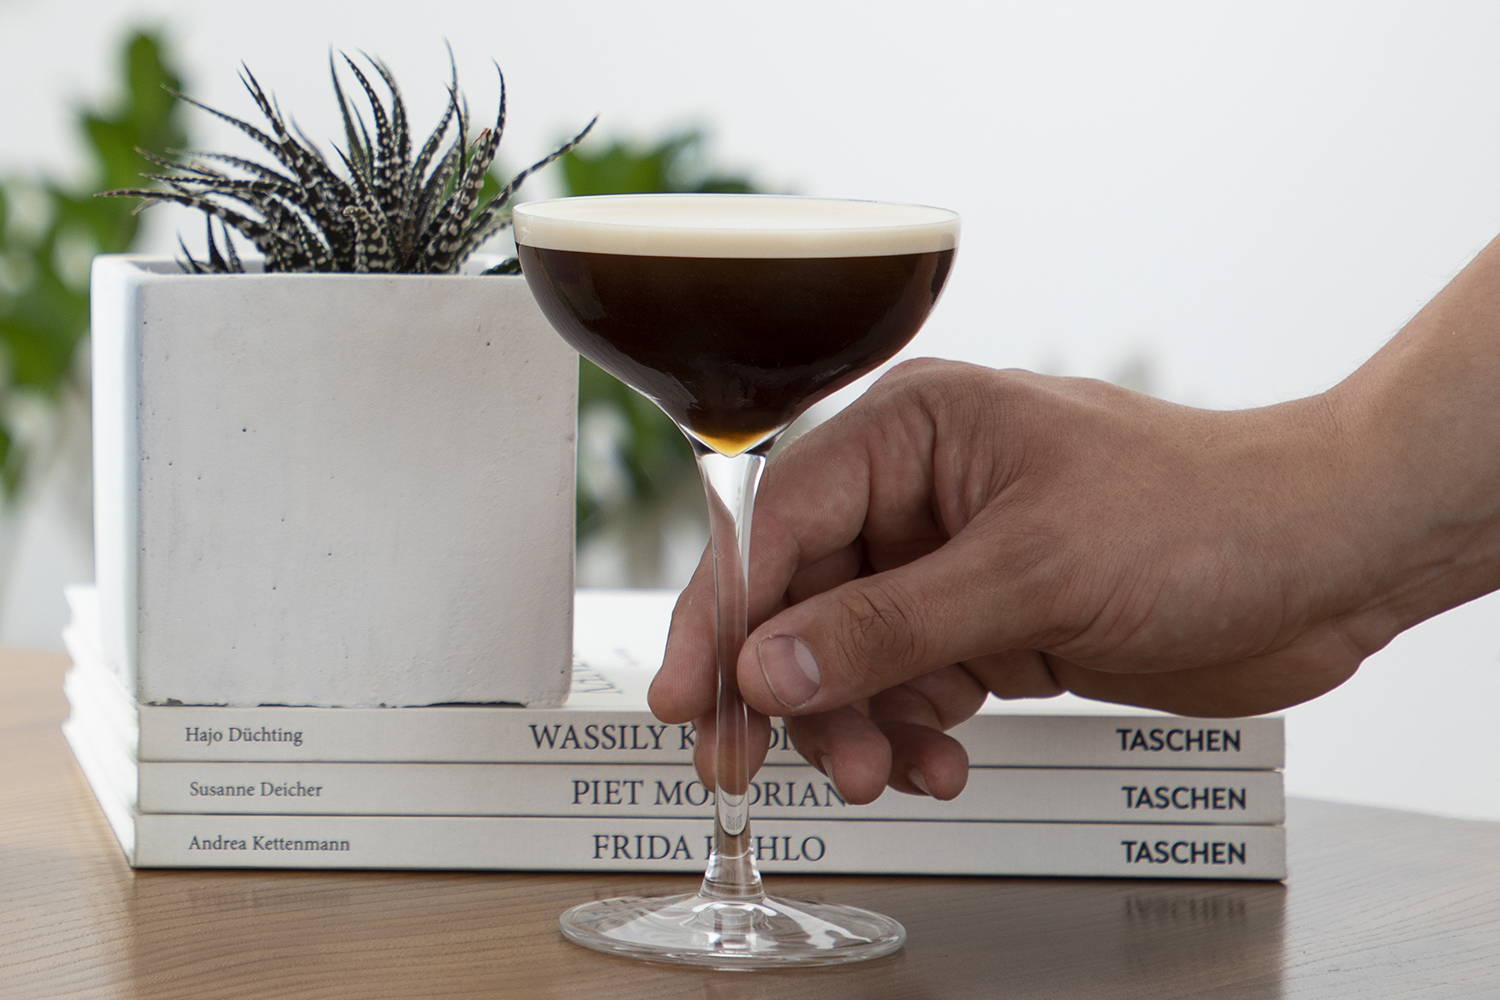 Espresso Martini cocktail with handing reaching in to pick it up